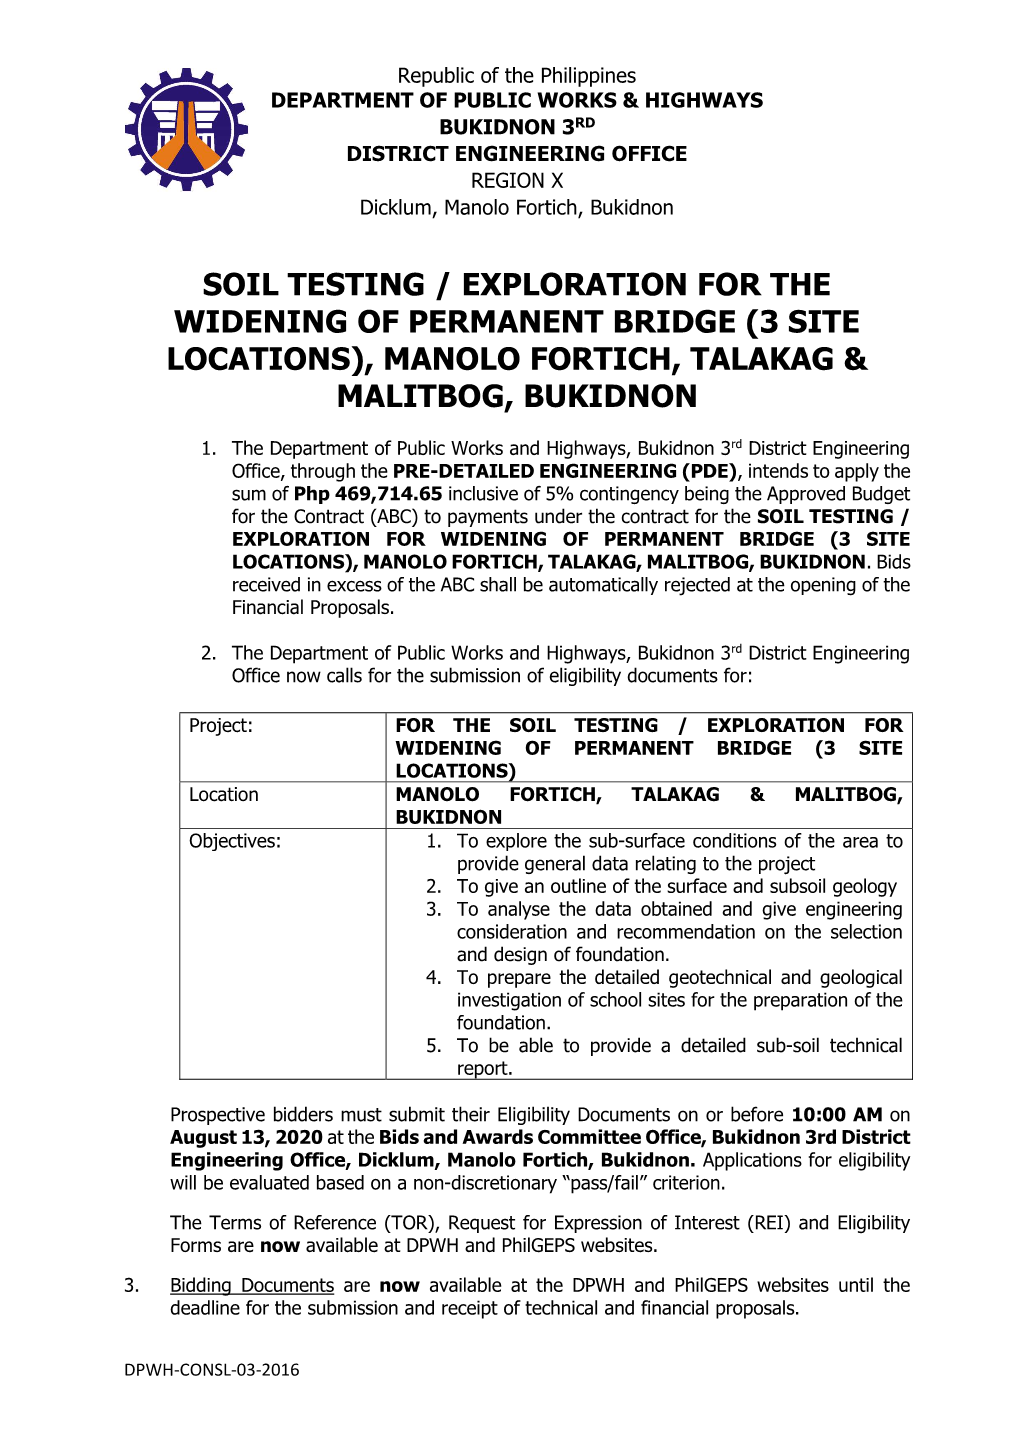 Soil Testing / Exploration for the Widening of Permanent Bridge (3 Site Locations), Manolo Fortich, Talakag & Malitbog, Bukidnon